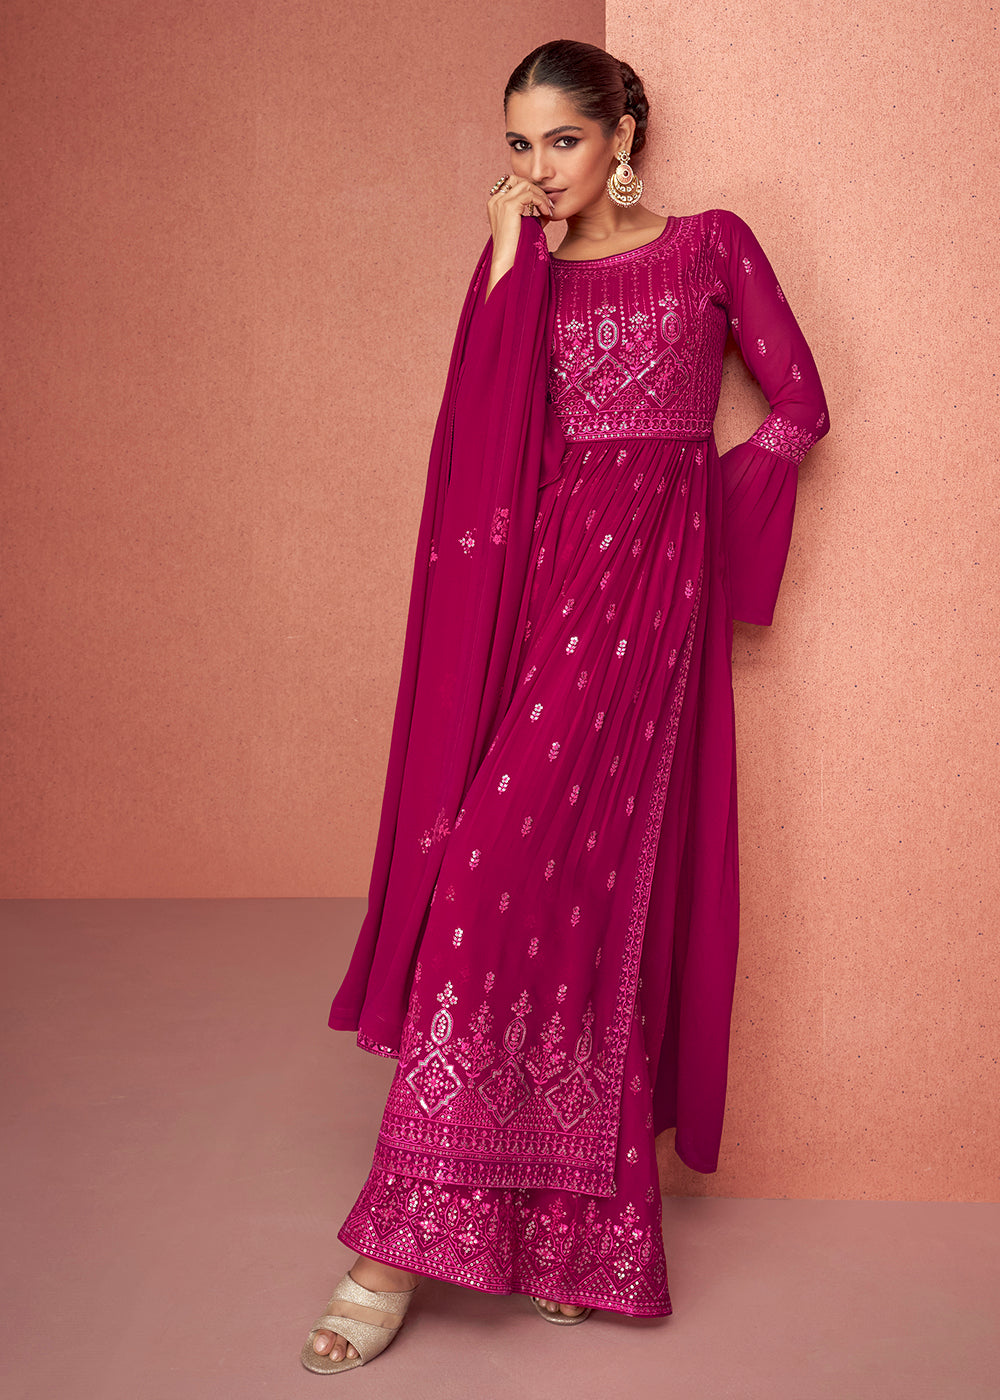 Buy Now Hot Pink Anarkali Style Georgette Embellished Palazzo Salwar Suit Online in USA, UK, Canada & Worldwide at Empress Clothing.